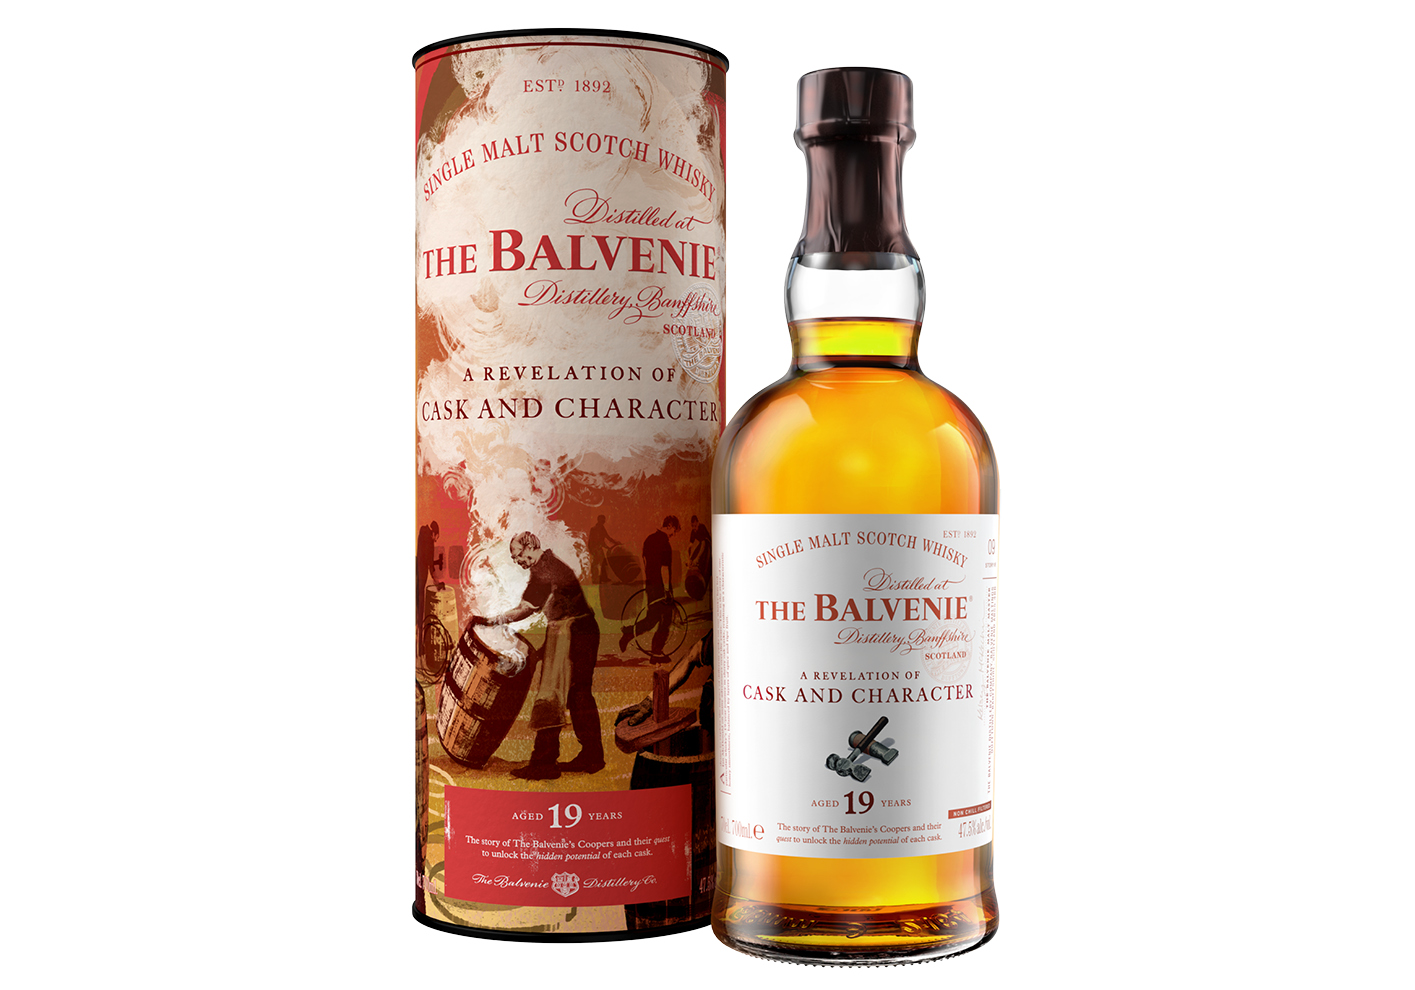 The Balvenie: A Revelation of Cask and Character